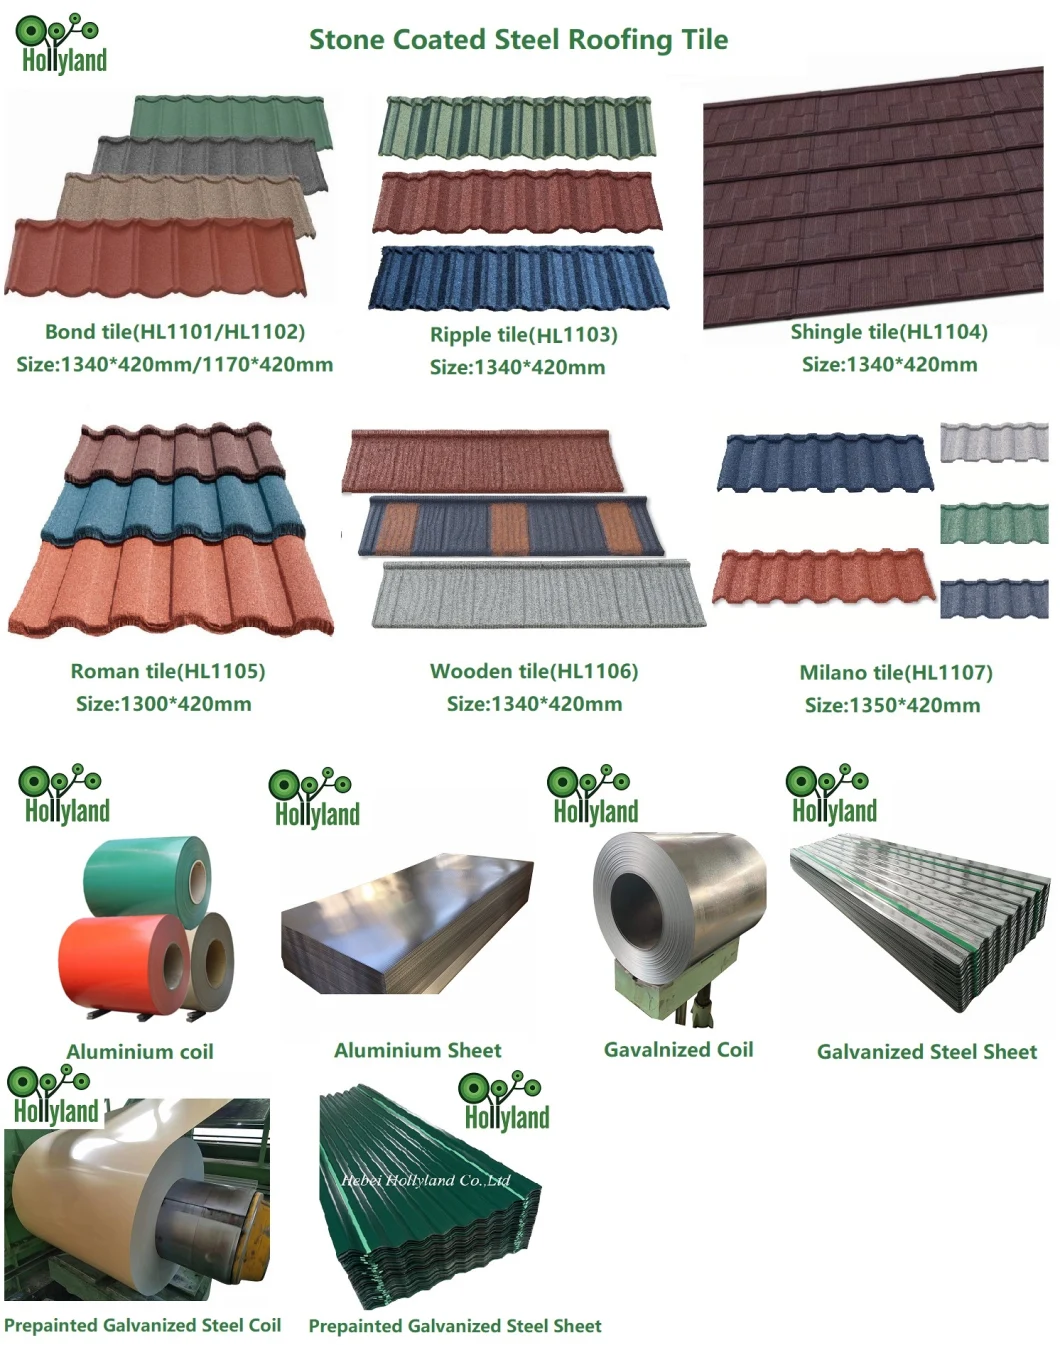 Shingle Designed Metal Roof Tiles Roofing Sheet Galvanized Corrugated Tiles Stone Coated Steel Roofing Panels